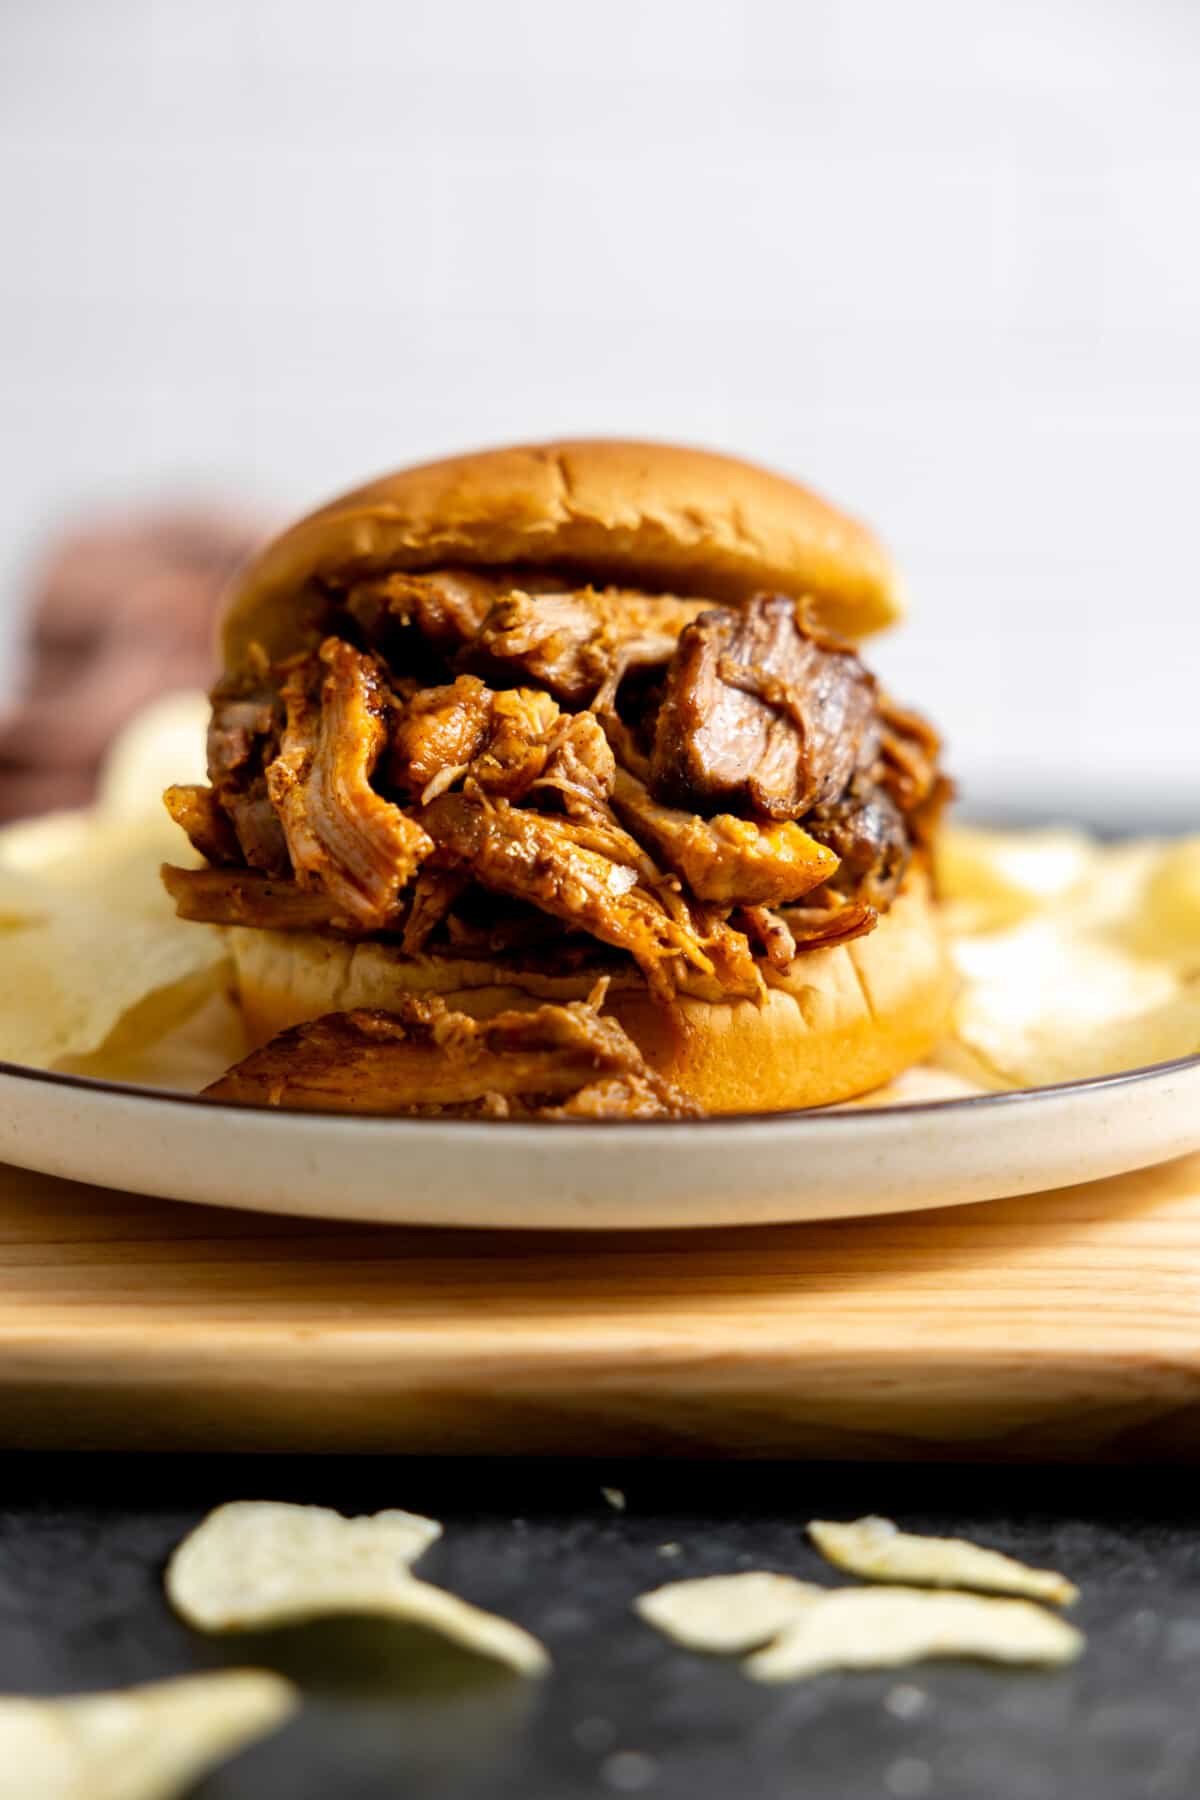 Slow cooker pulled pork on a hamburger bun served with potato chips.